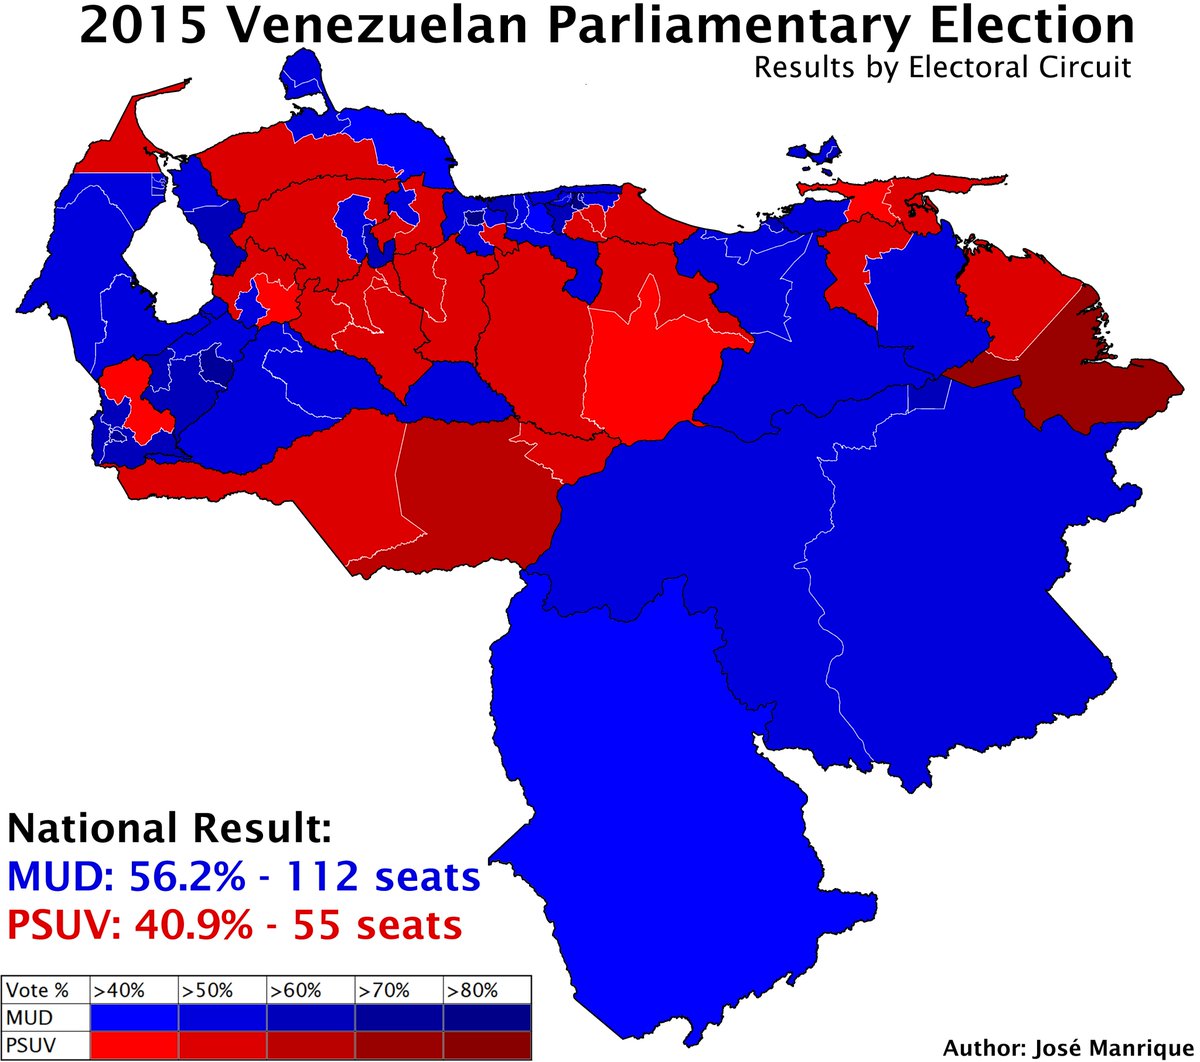 The 2015 Venezuelan Parliamentary Election was one of the most exciting elections I've witnessed. PSUV, the party of president Nicolás Maduro, lost in a landslide to the MUD, a coalition of opposition parties. It was the 2nd defeat chavismo suffered in the polls in 16 years.